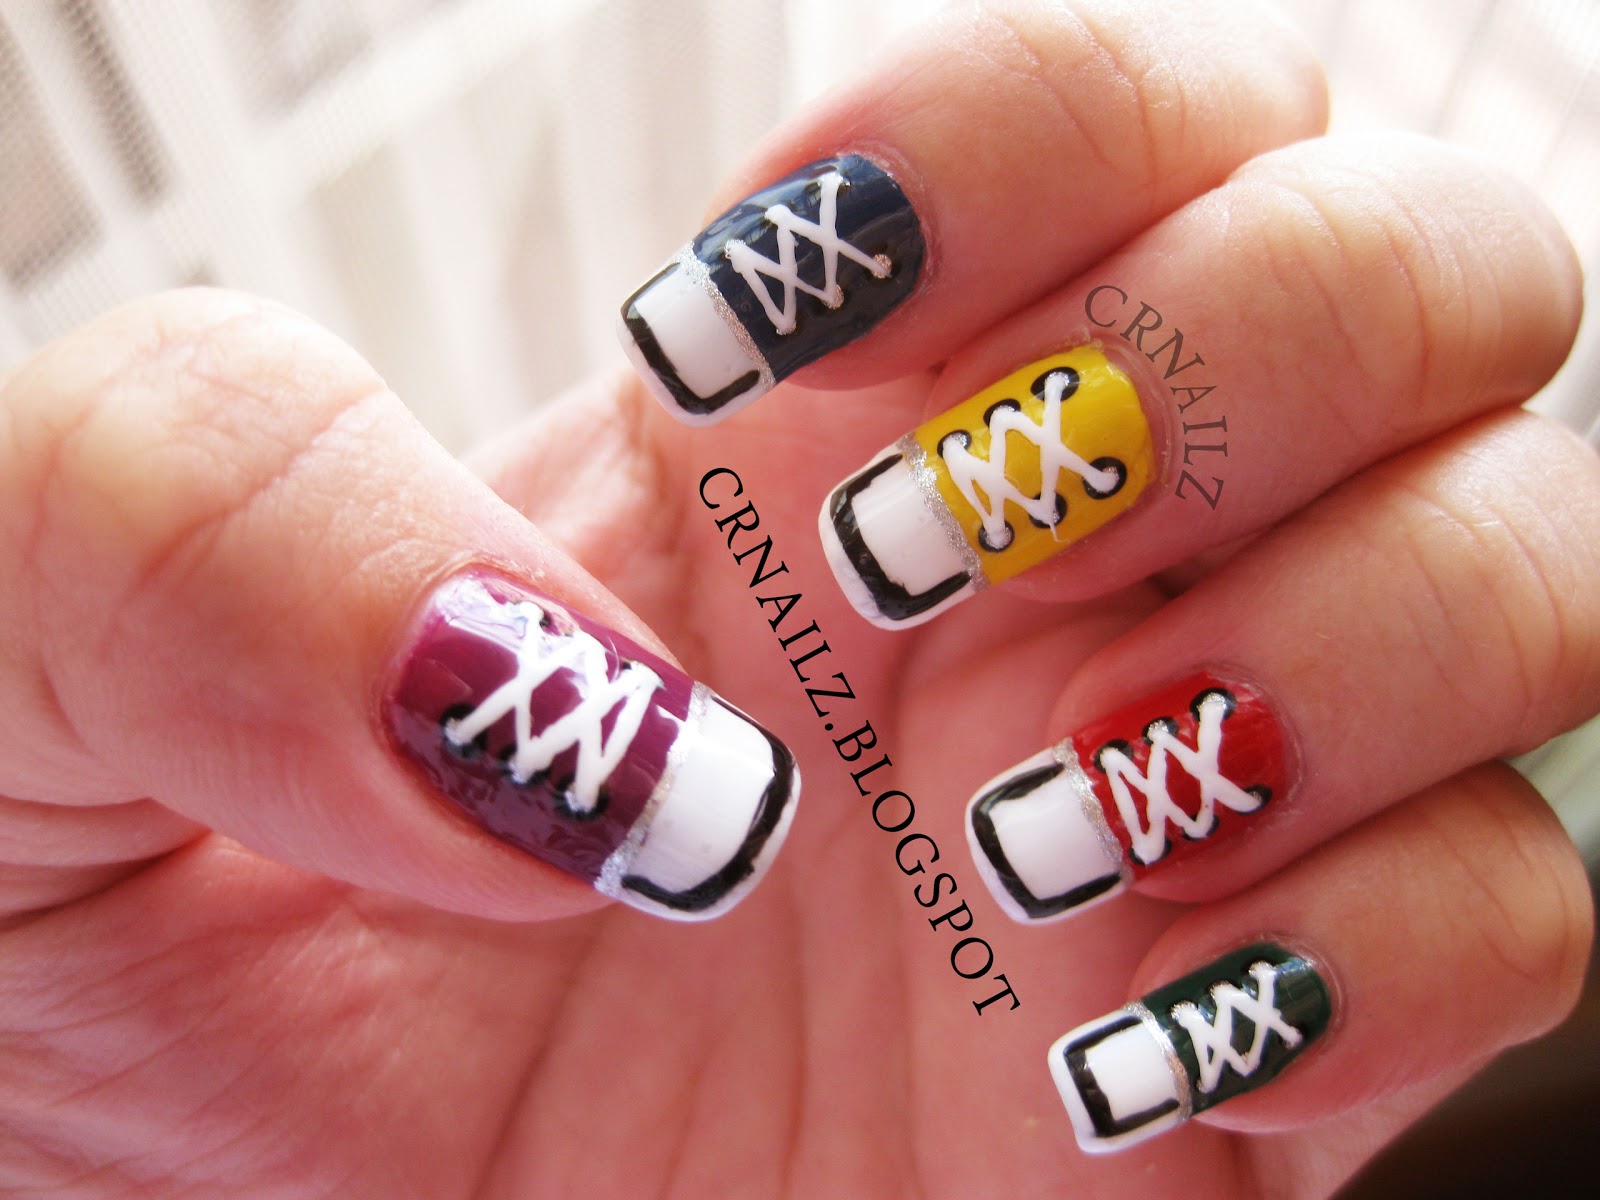 2. Fake nails with Converse logo - wide 9